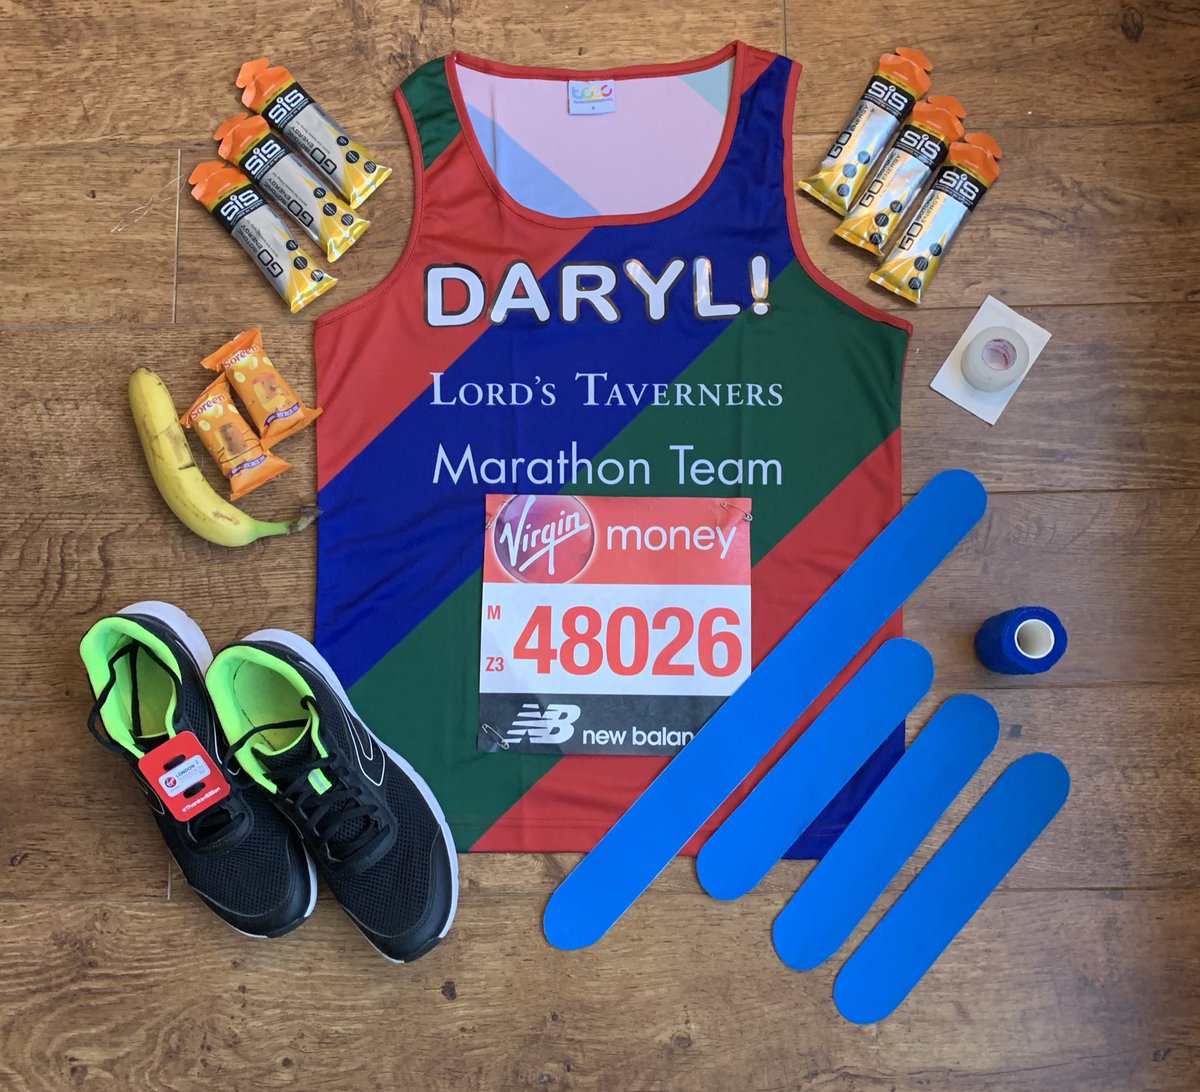 So Daryl is #Officially ready for the @LondonMarathon tomorrow for The @LordsTaverners!

Follow him on the #App with his race number!

Still plenty of time to #Sponsor him below ⬇️

justgiving.com/DarylBP

#TeamTavs #SportingChances #SunshineGC #Daryl